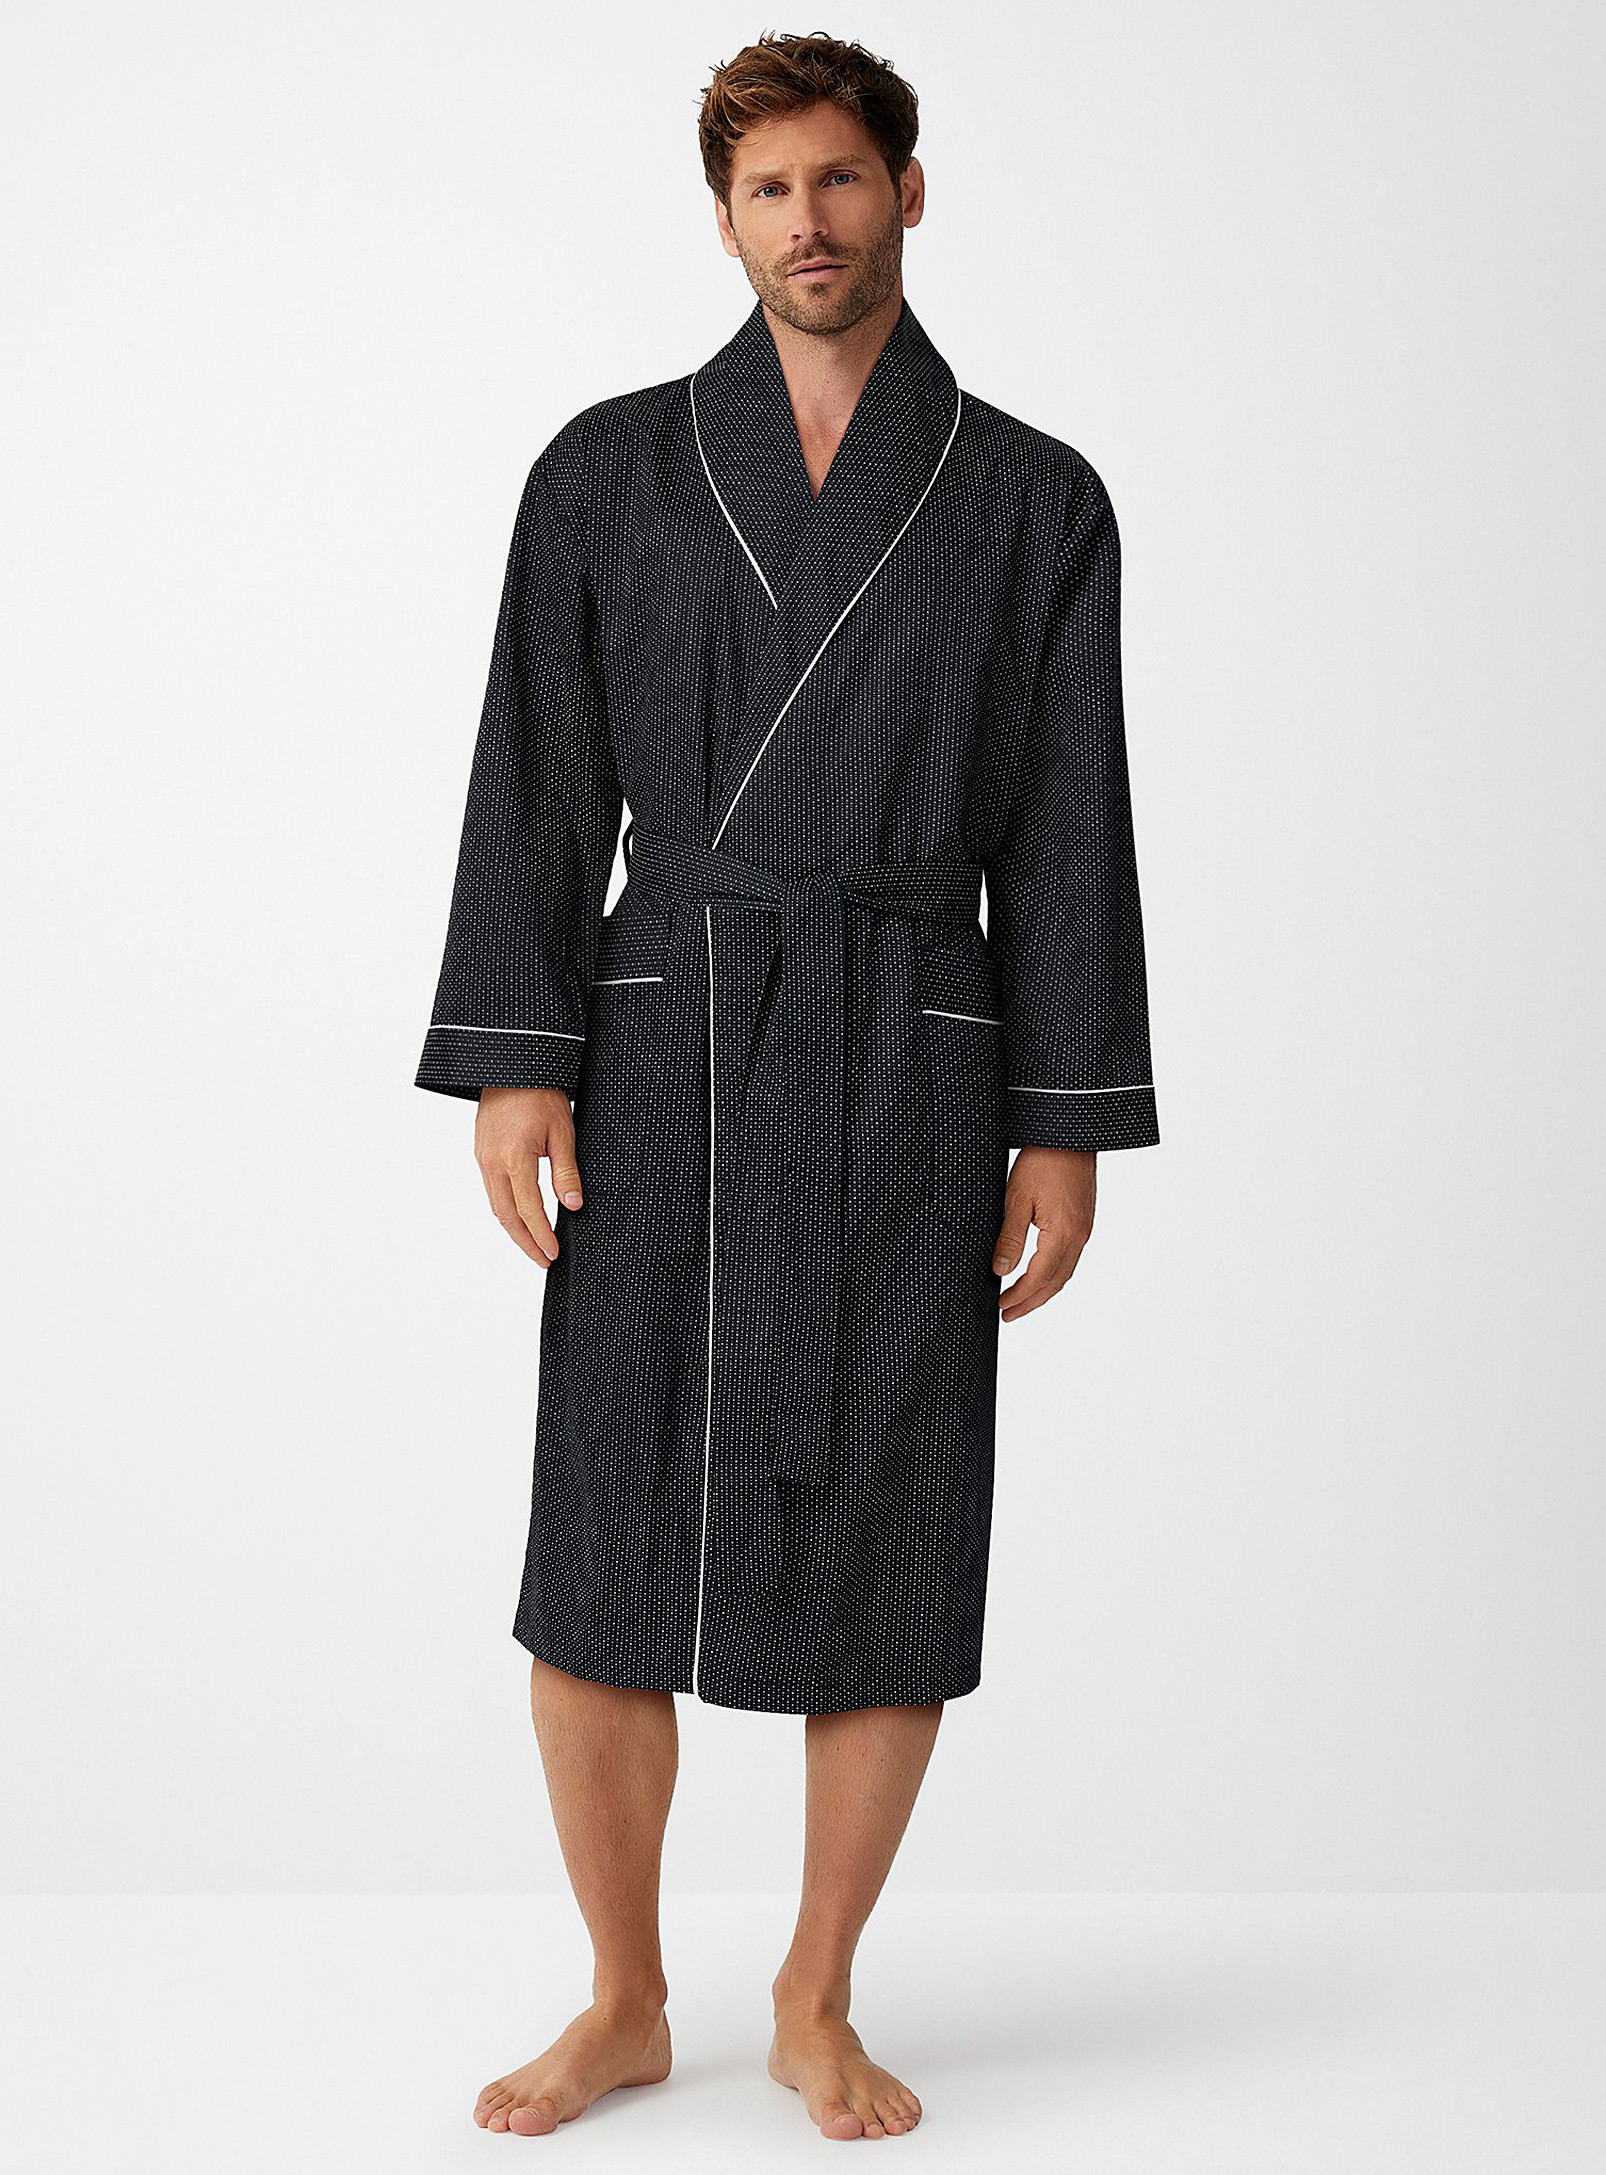 Majestic Cotton Micro Dotwork Robe In Patterned Black